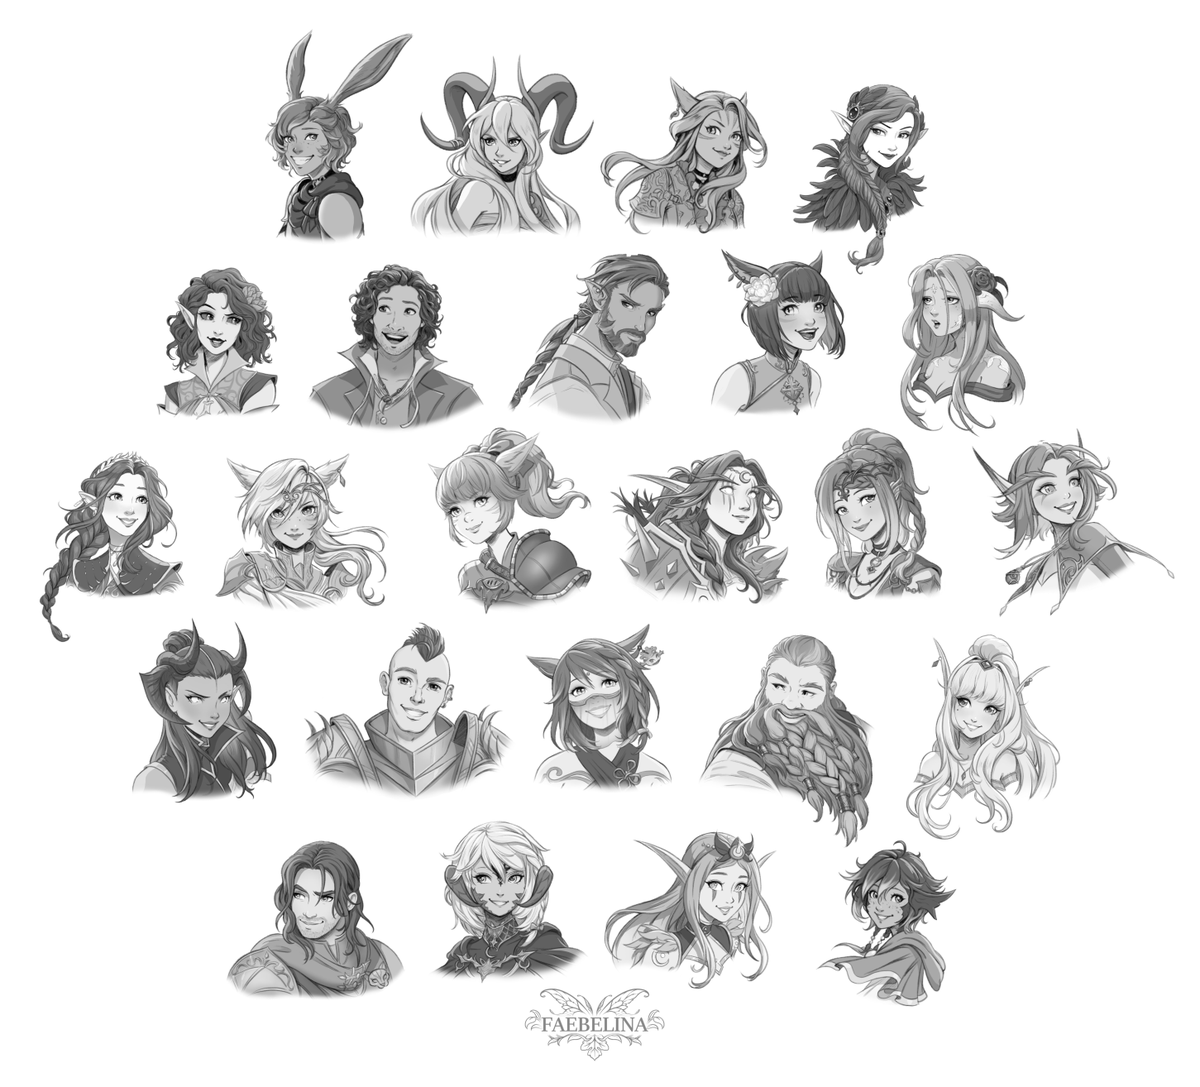 All the sketch portraits I've done for patrons! I absolutely love doing these and I'm so thankful that folks were interested in letting me make them!